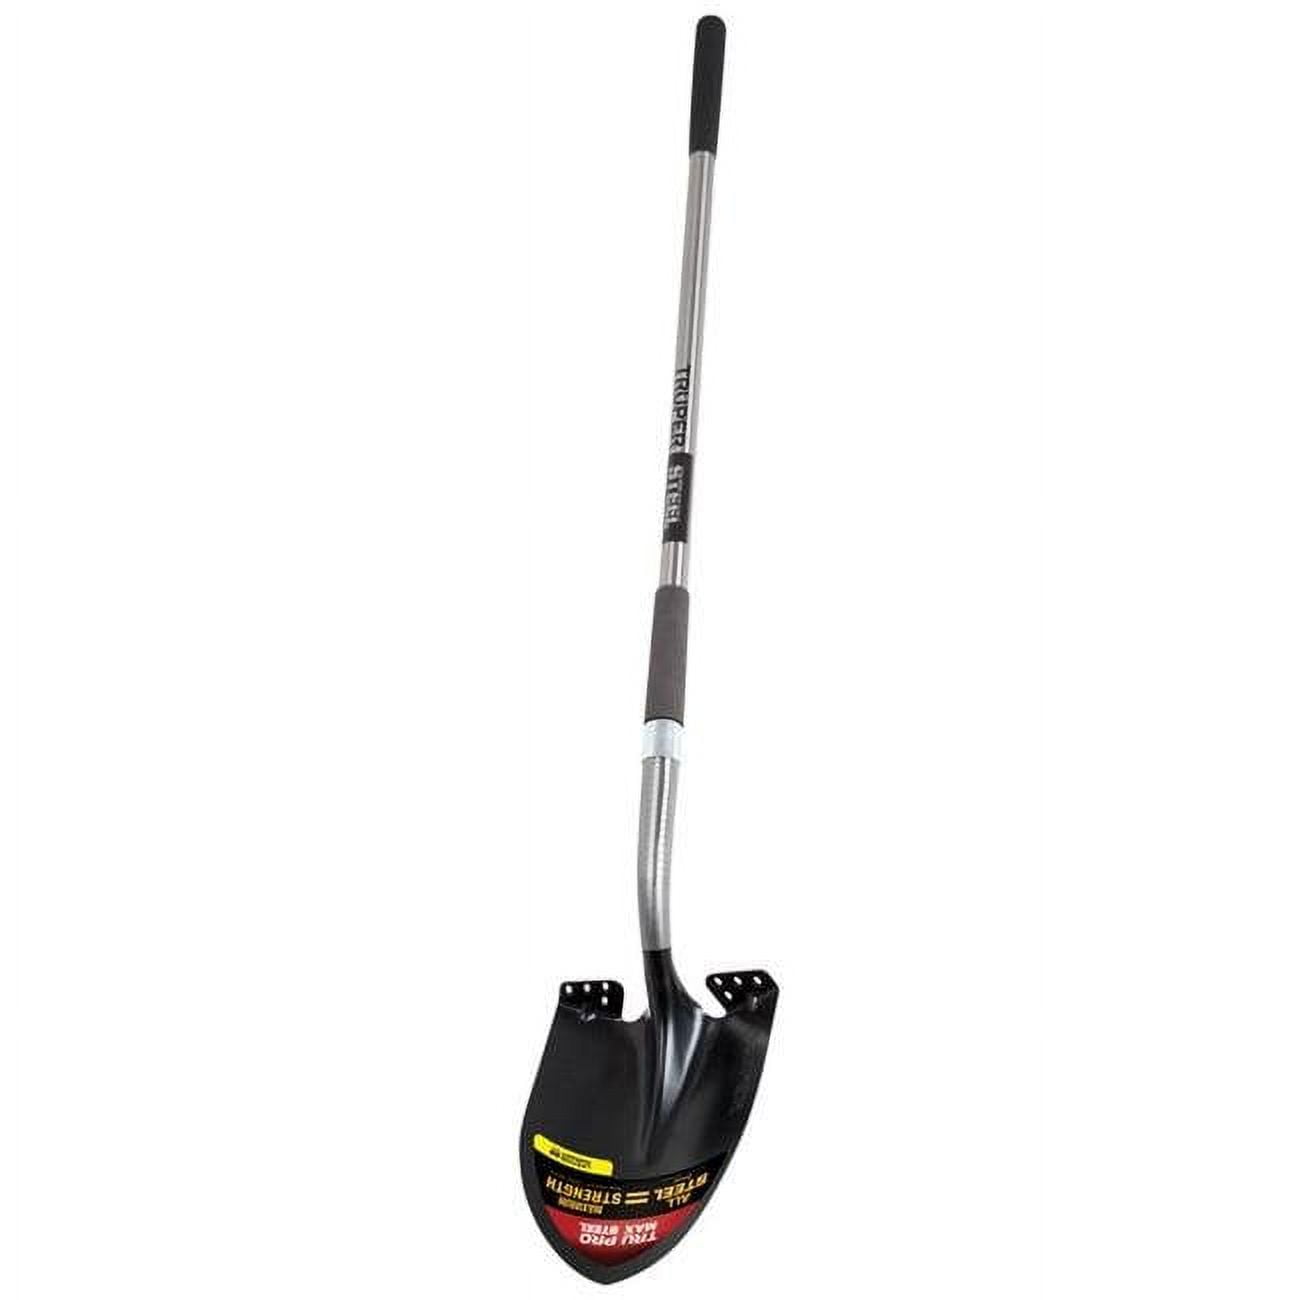 11 X 8.75 X 48 In. Round Point Shovel Steel Long Handle, Assorted